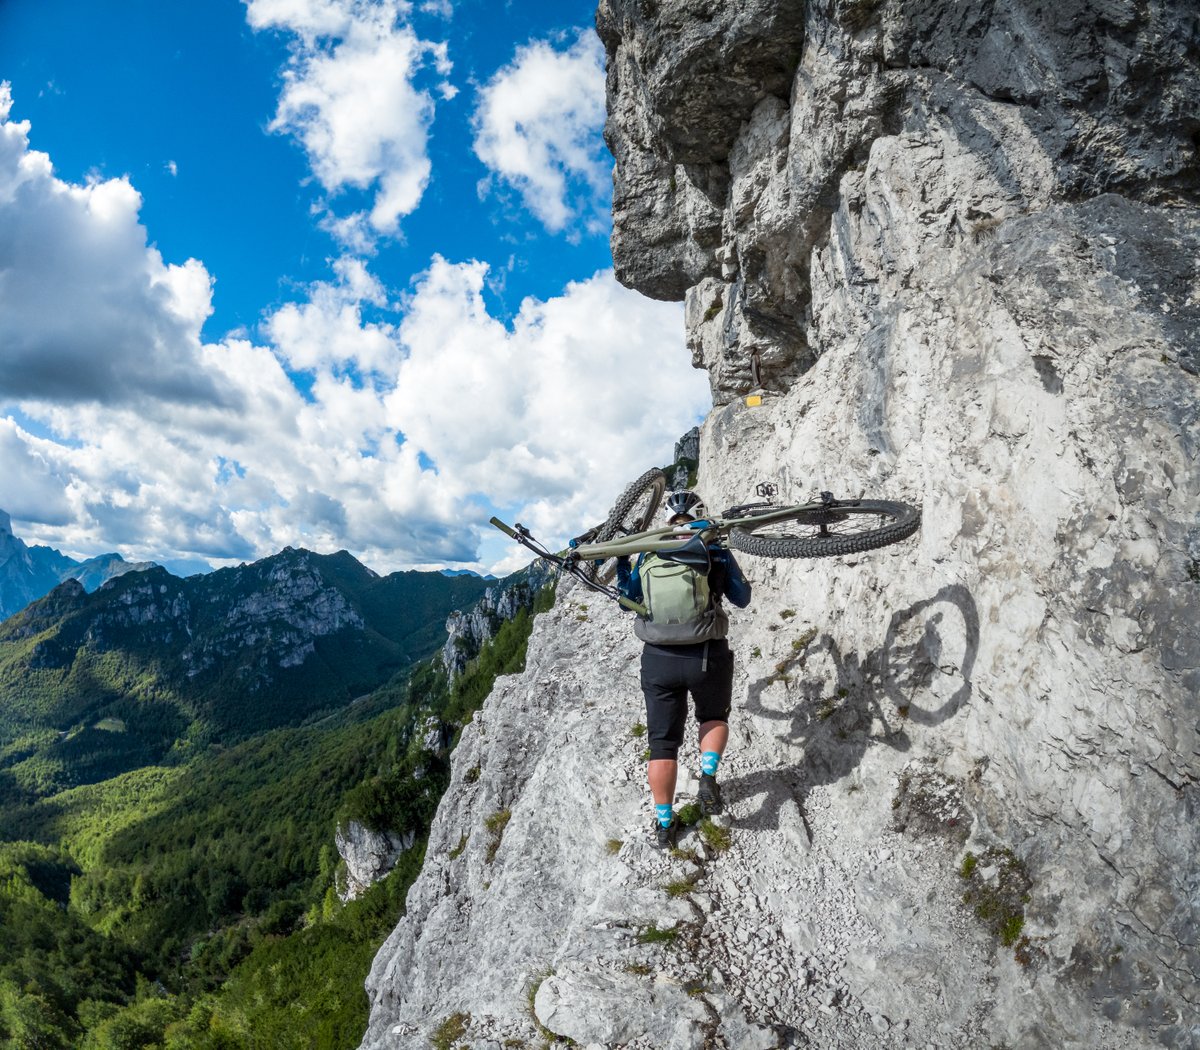 Photo of the Day: No shame in walking this section 🤯 #GoProAwards recipient Christoph Oberschneider played it safe + scored $250 from this #GoProHERO11 Black snap.

#GoPro #GoProMTB #Austria #Biking #MTB